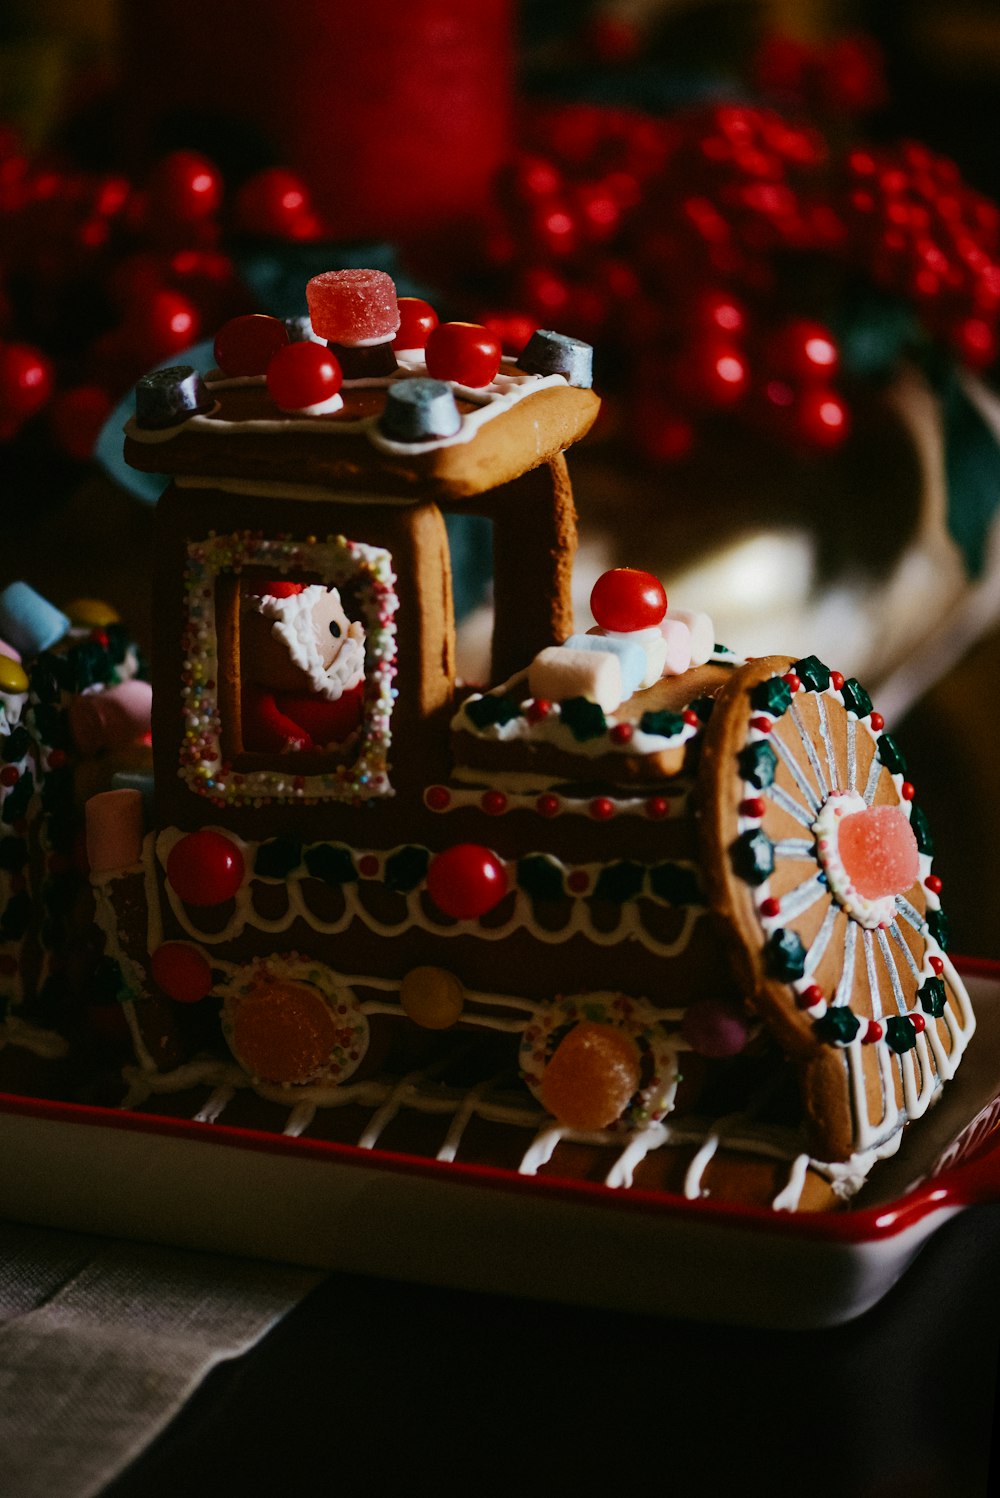 a decorated gingerbread train on a plate